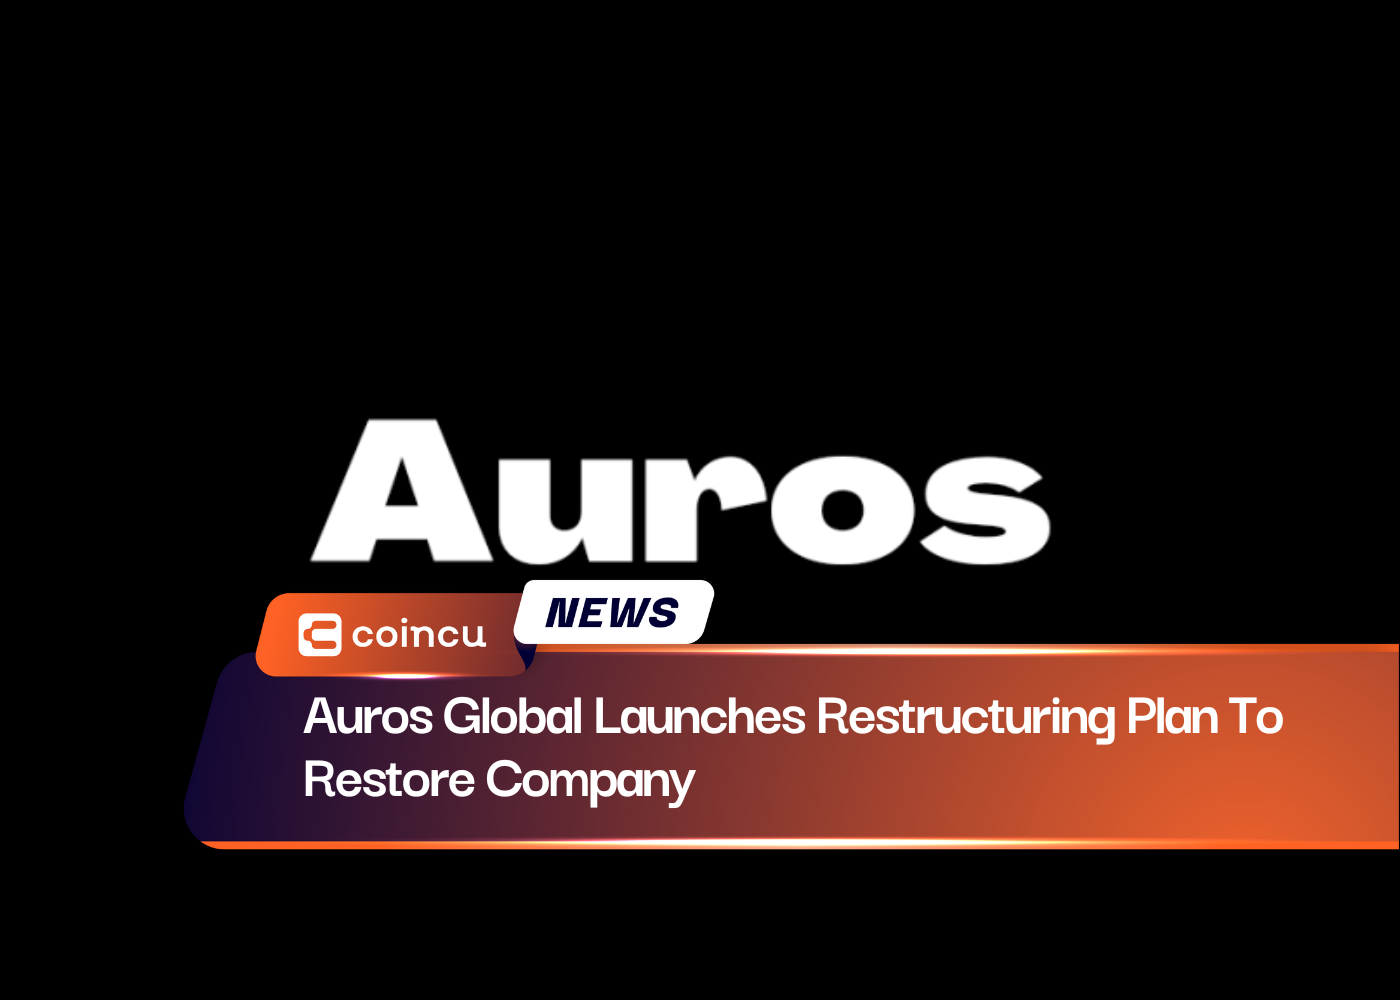 Auros Global Launches Restructuring Plan To Restore Company